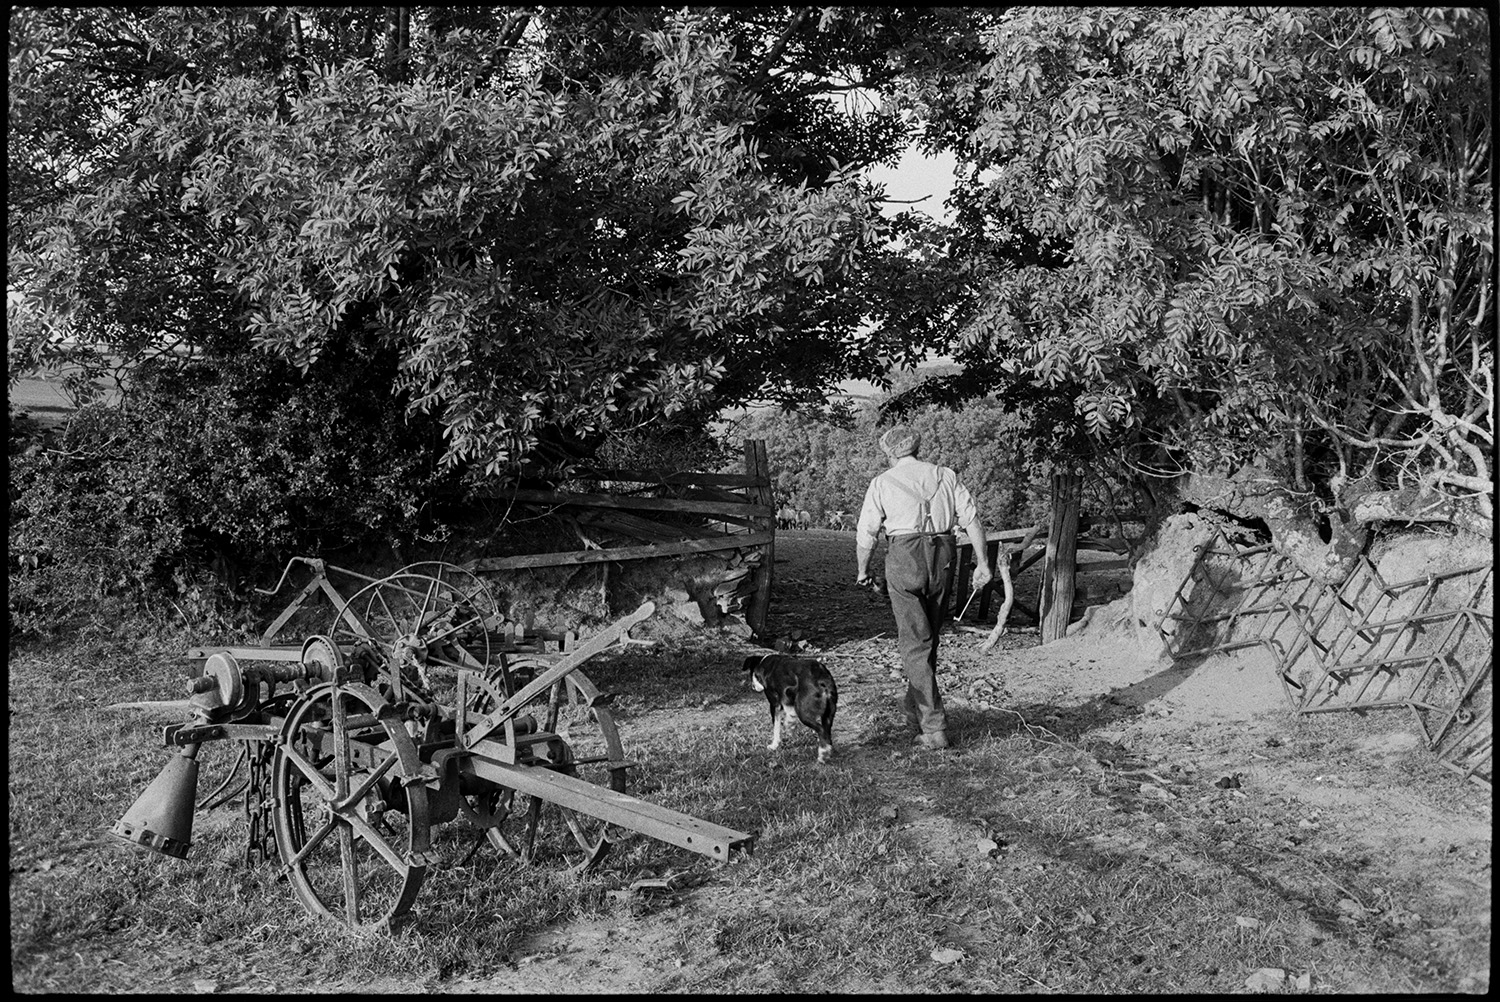 Farmer going to feed sheep walking past old machine mending bath as water trough.
[George Ayre walking through a field entrance with his dog at Ashwell, Dolton. They are passing a piece of old farm machinery and a harrow lying against the field hedge.]